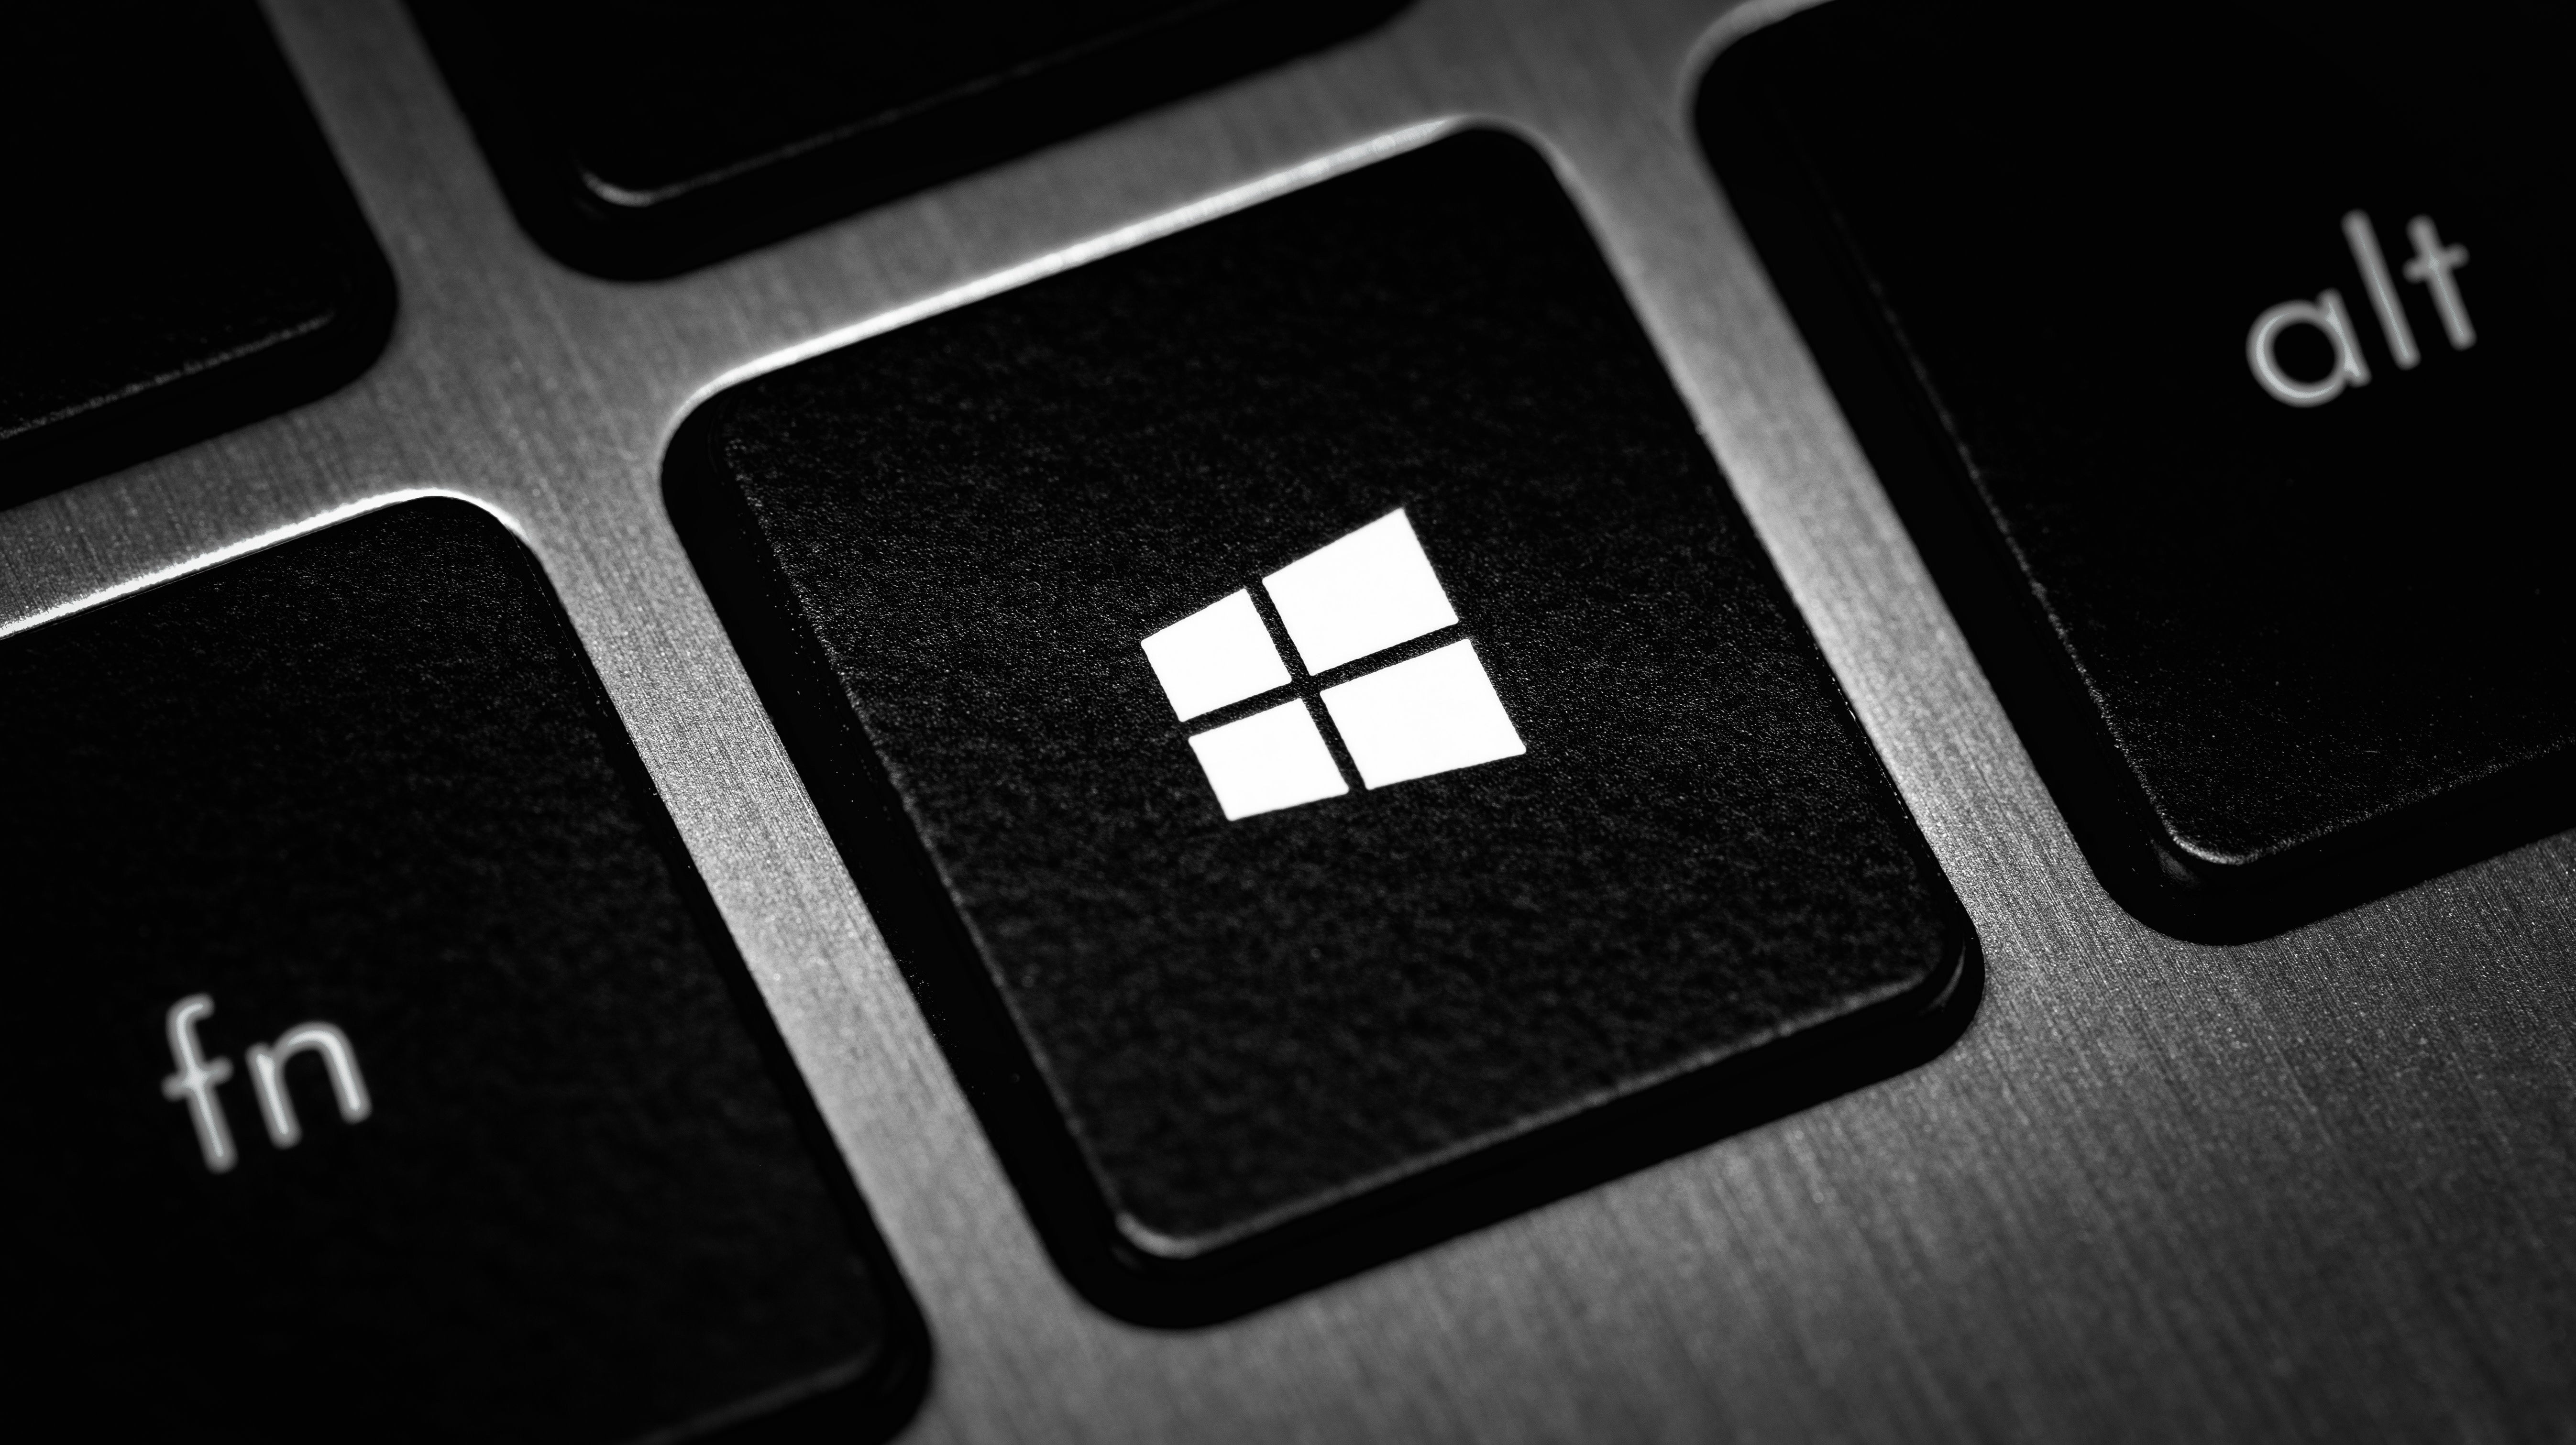 Blame This Windows 10 Bug For Your Recent VPN Issues